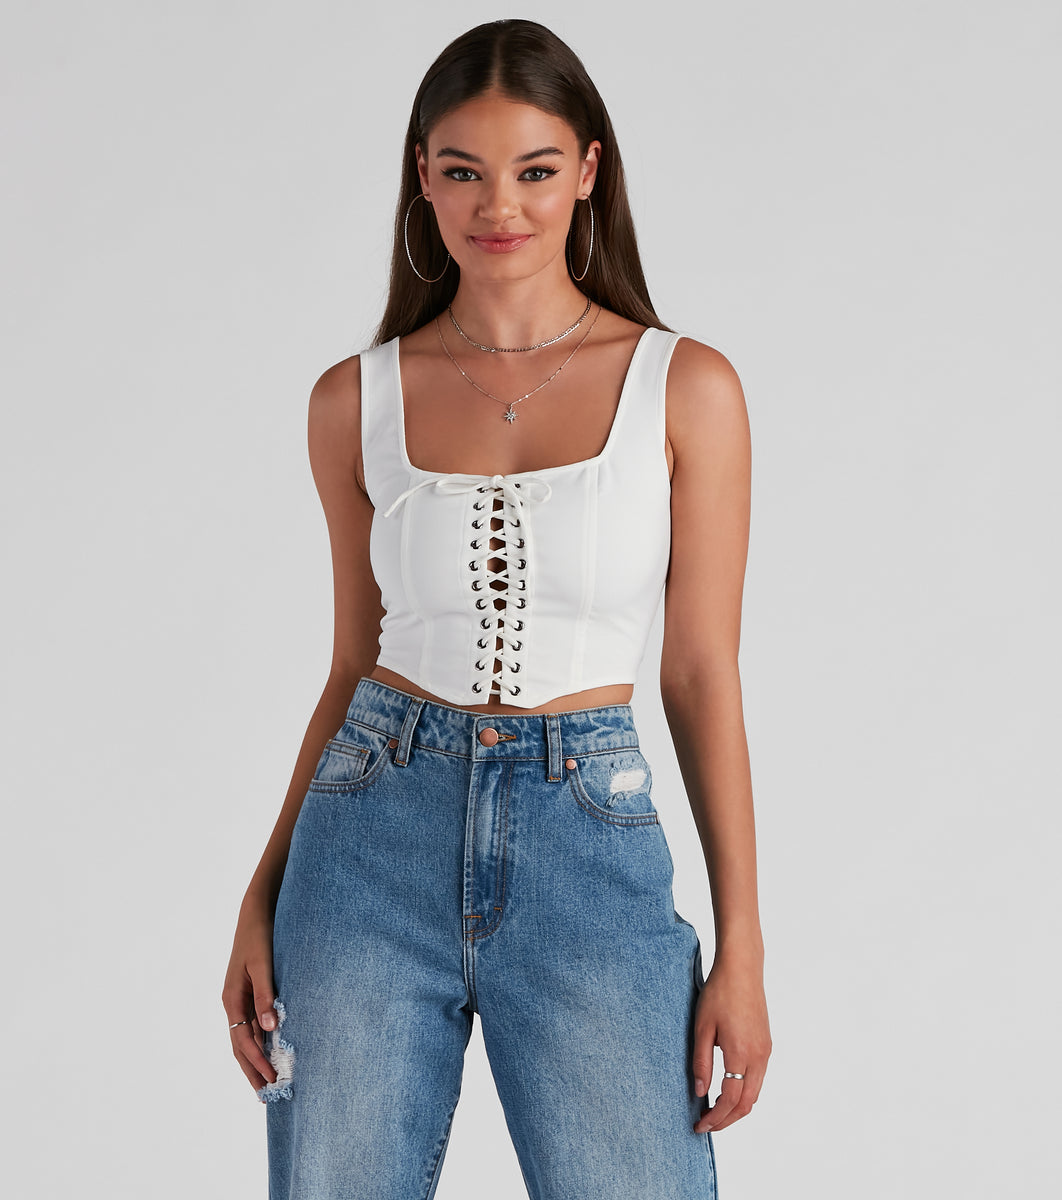 Lace up Lien corset over basic shirt with Alex track pants - KLuK CGDT